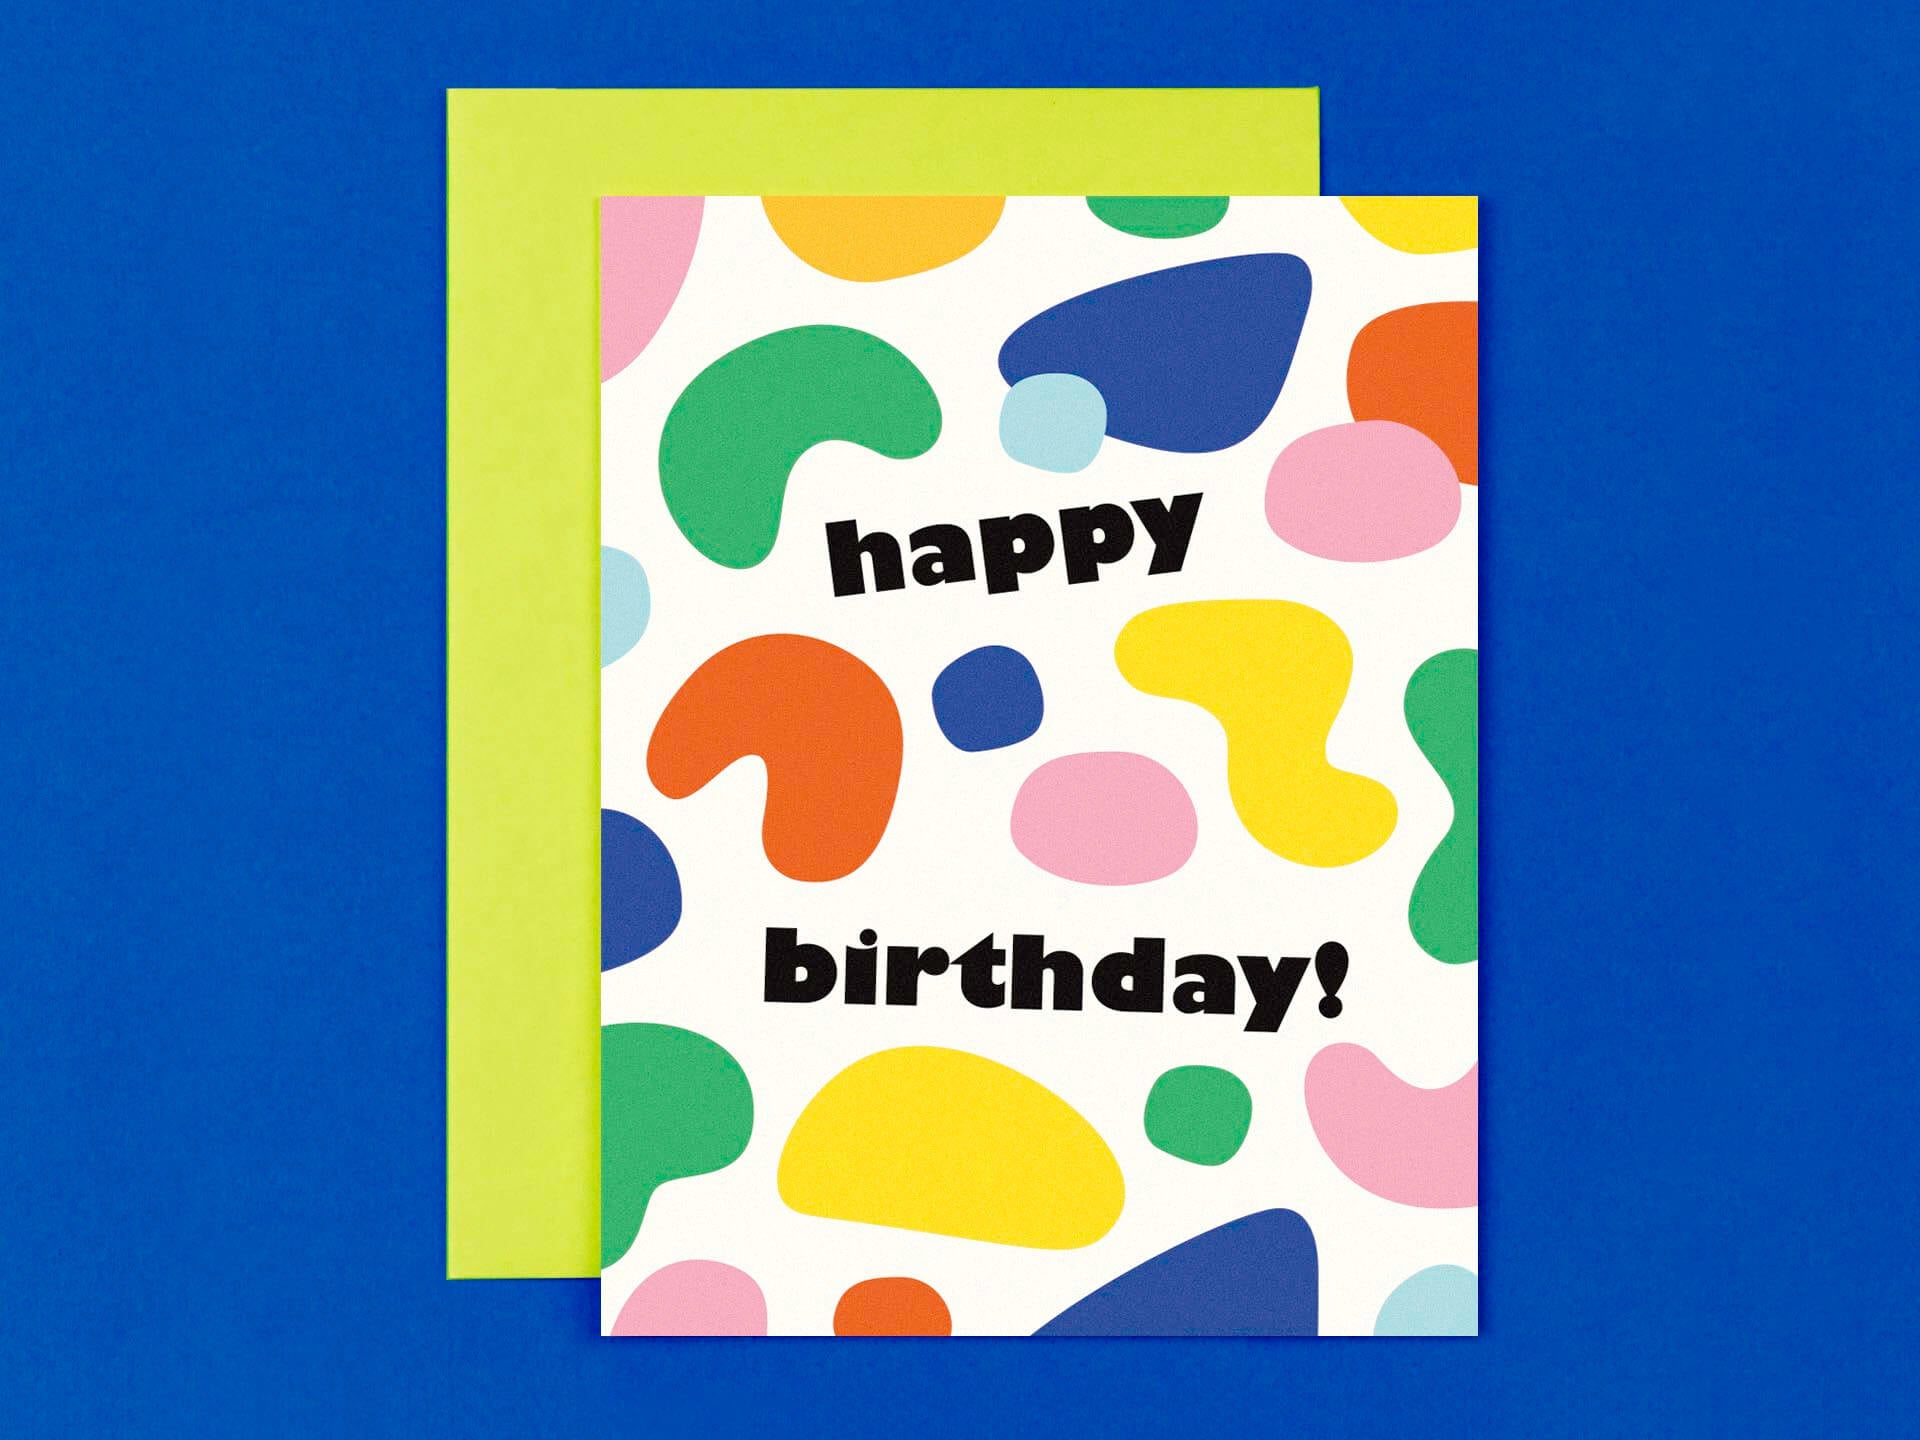 Modern birthday card with colorful, abstract, blobby shape pattern. Made in USA by @mydarlin_bk